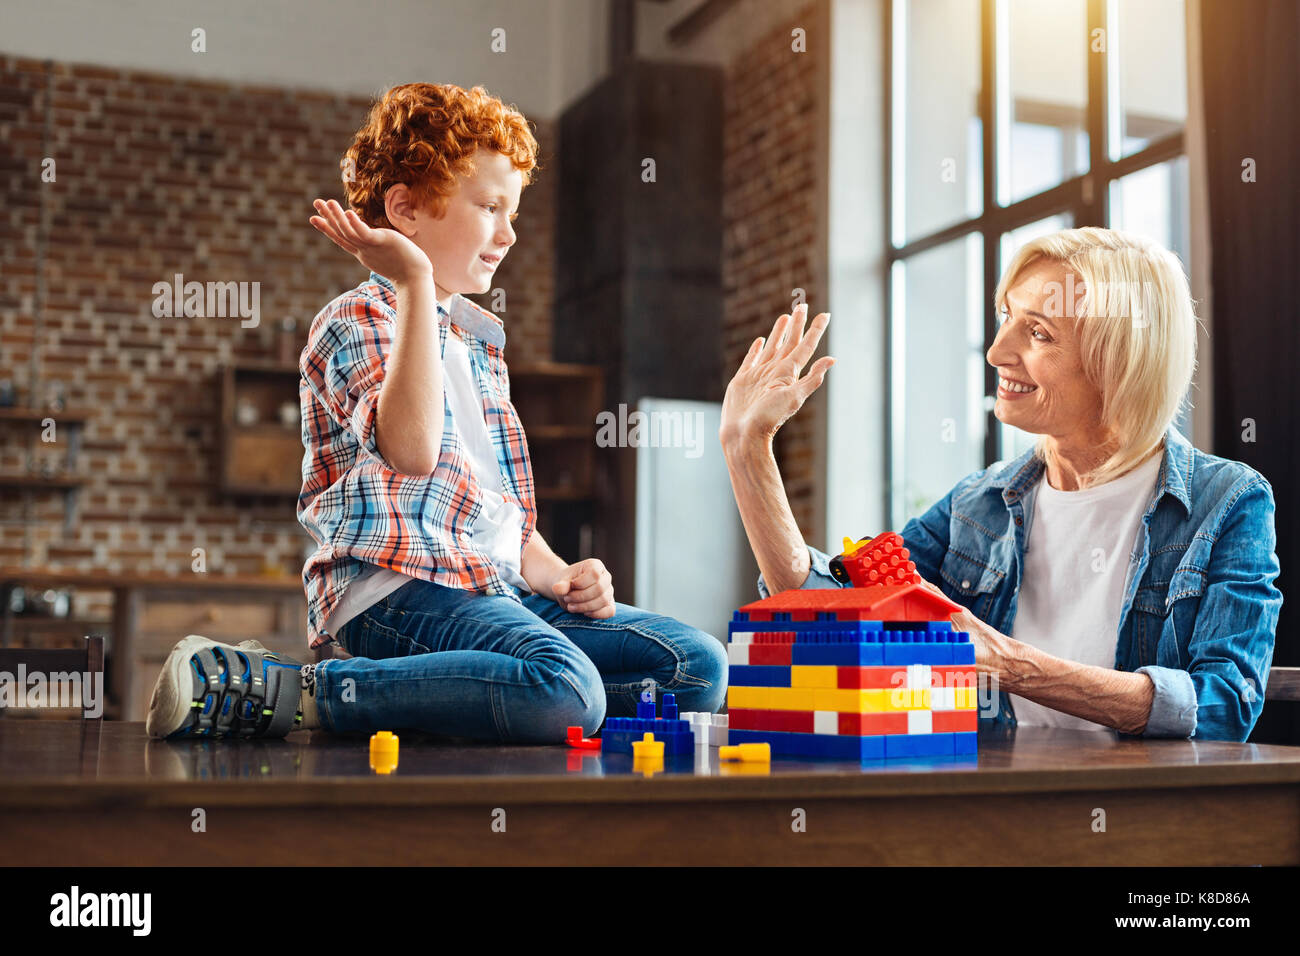 Cheerful family members high fiving while playing together Stock Photo